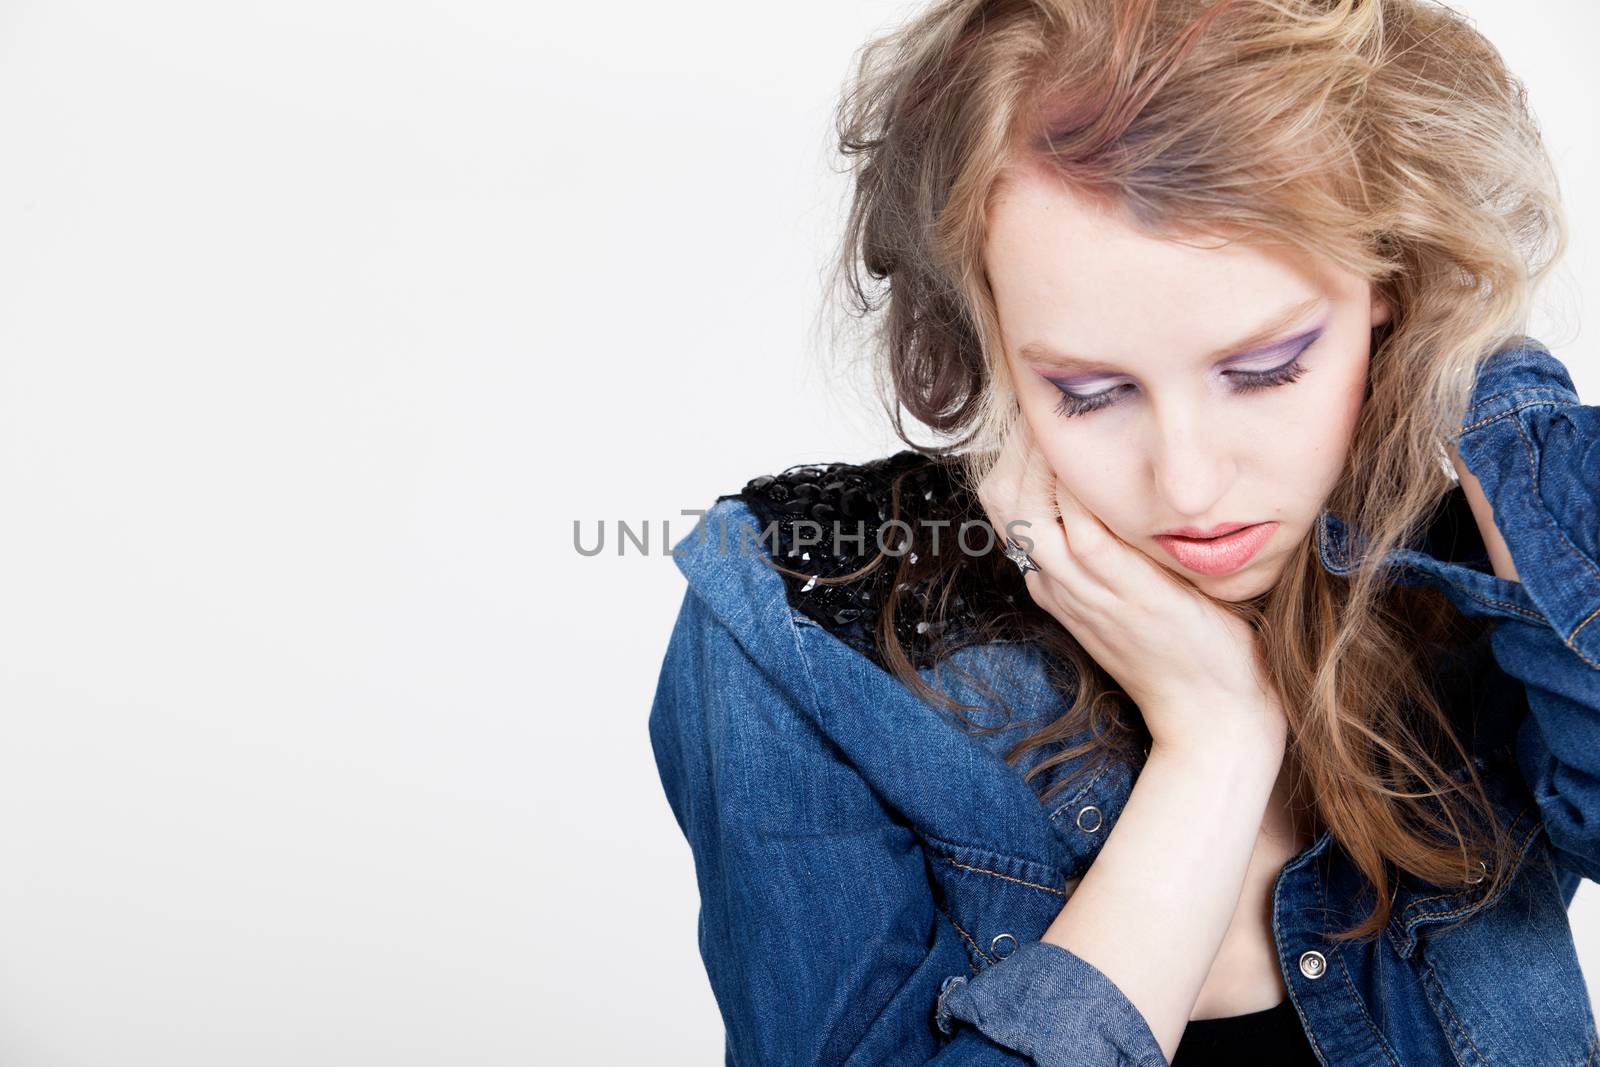 Young tough blond teenage girl with jeans blouse on a white background